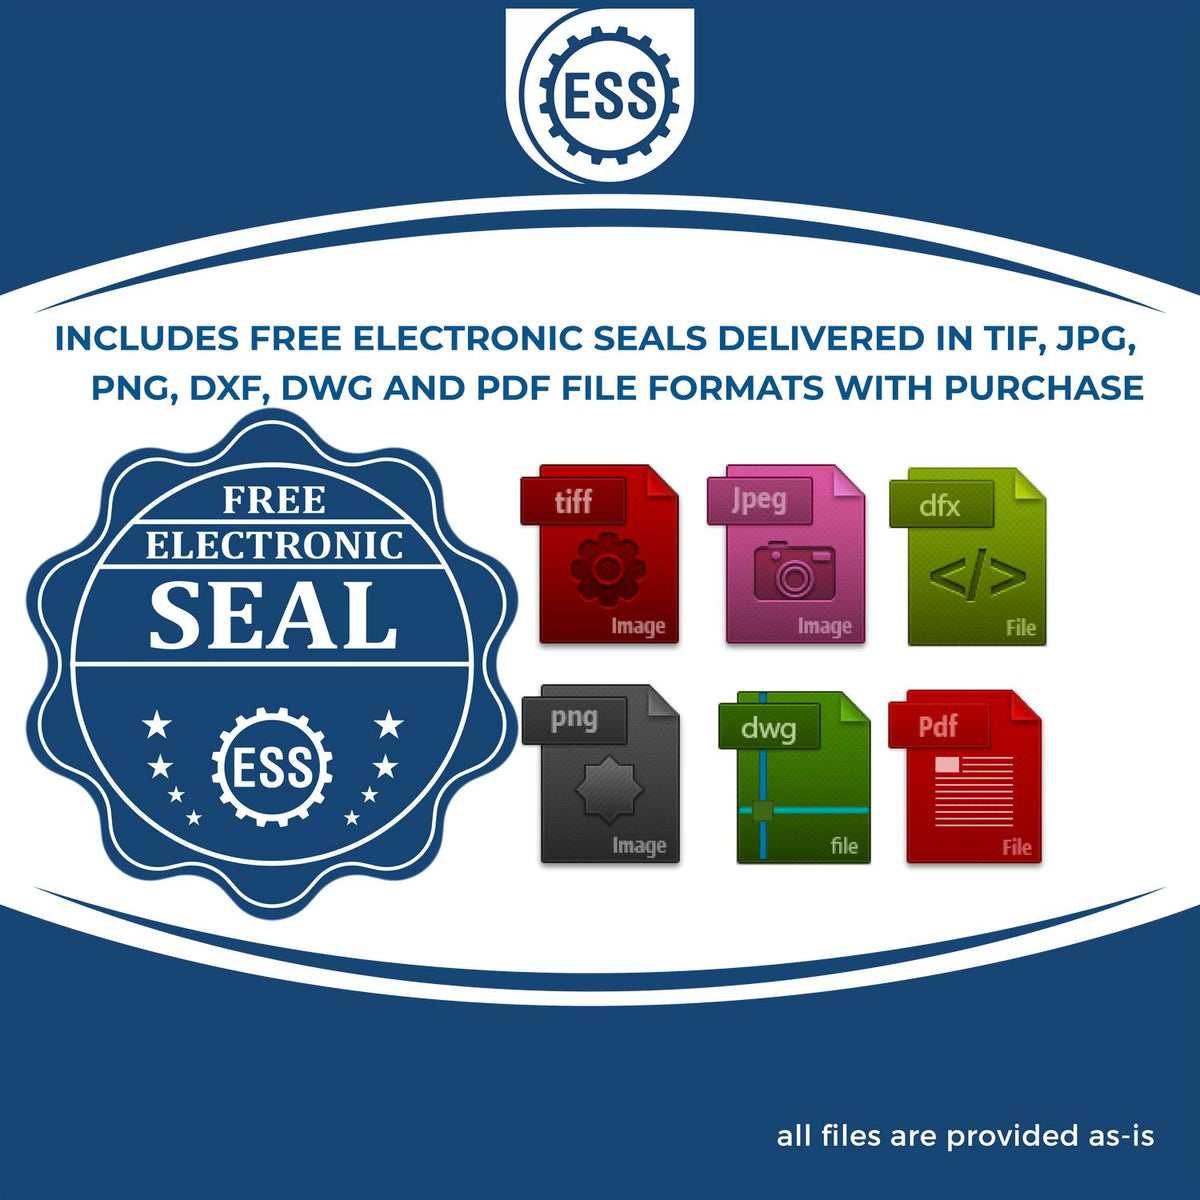 An infographic for the free electronic seal for the State of Nevada Extended Long Reach Engineer Seal illustrating the different file type icons such as DXF, DWG, TIF, JPG and PNG.